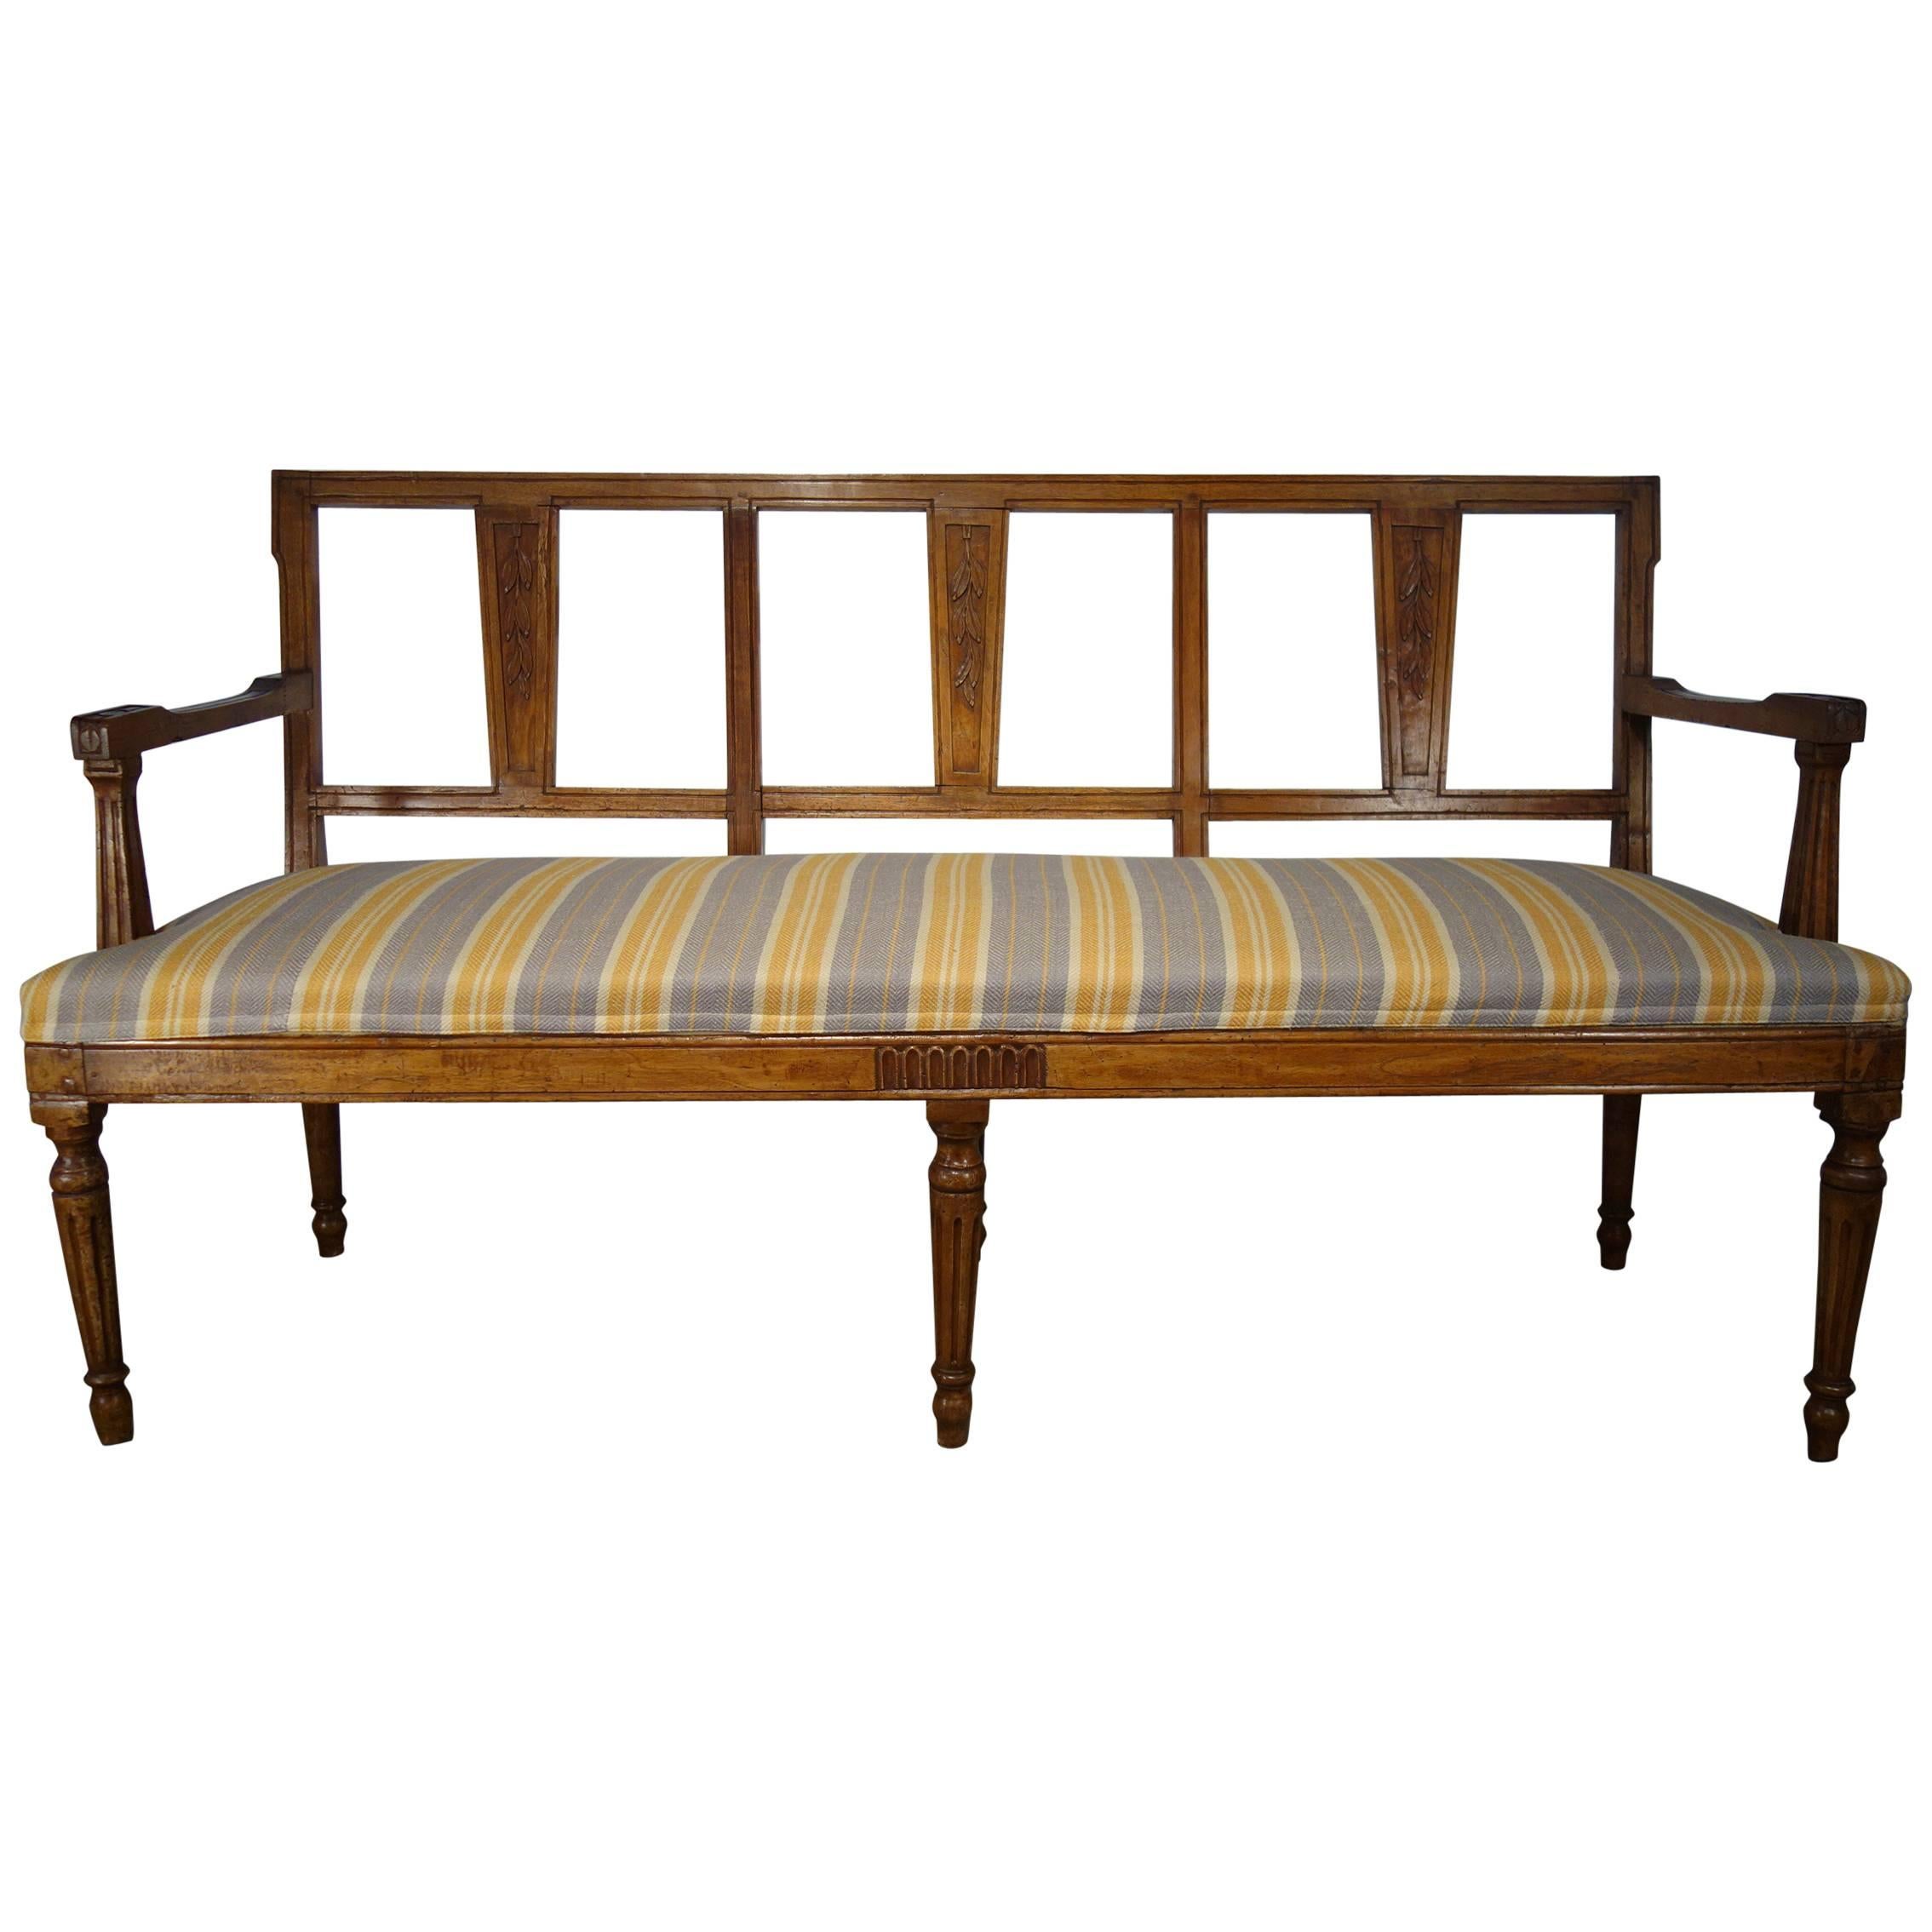 Antique Italian Lombardy Settee Couch, Louis XVI, circa 1860